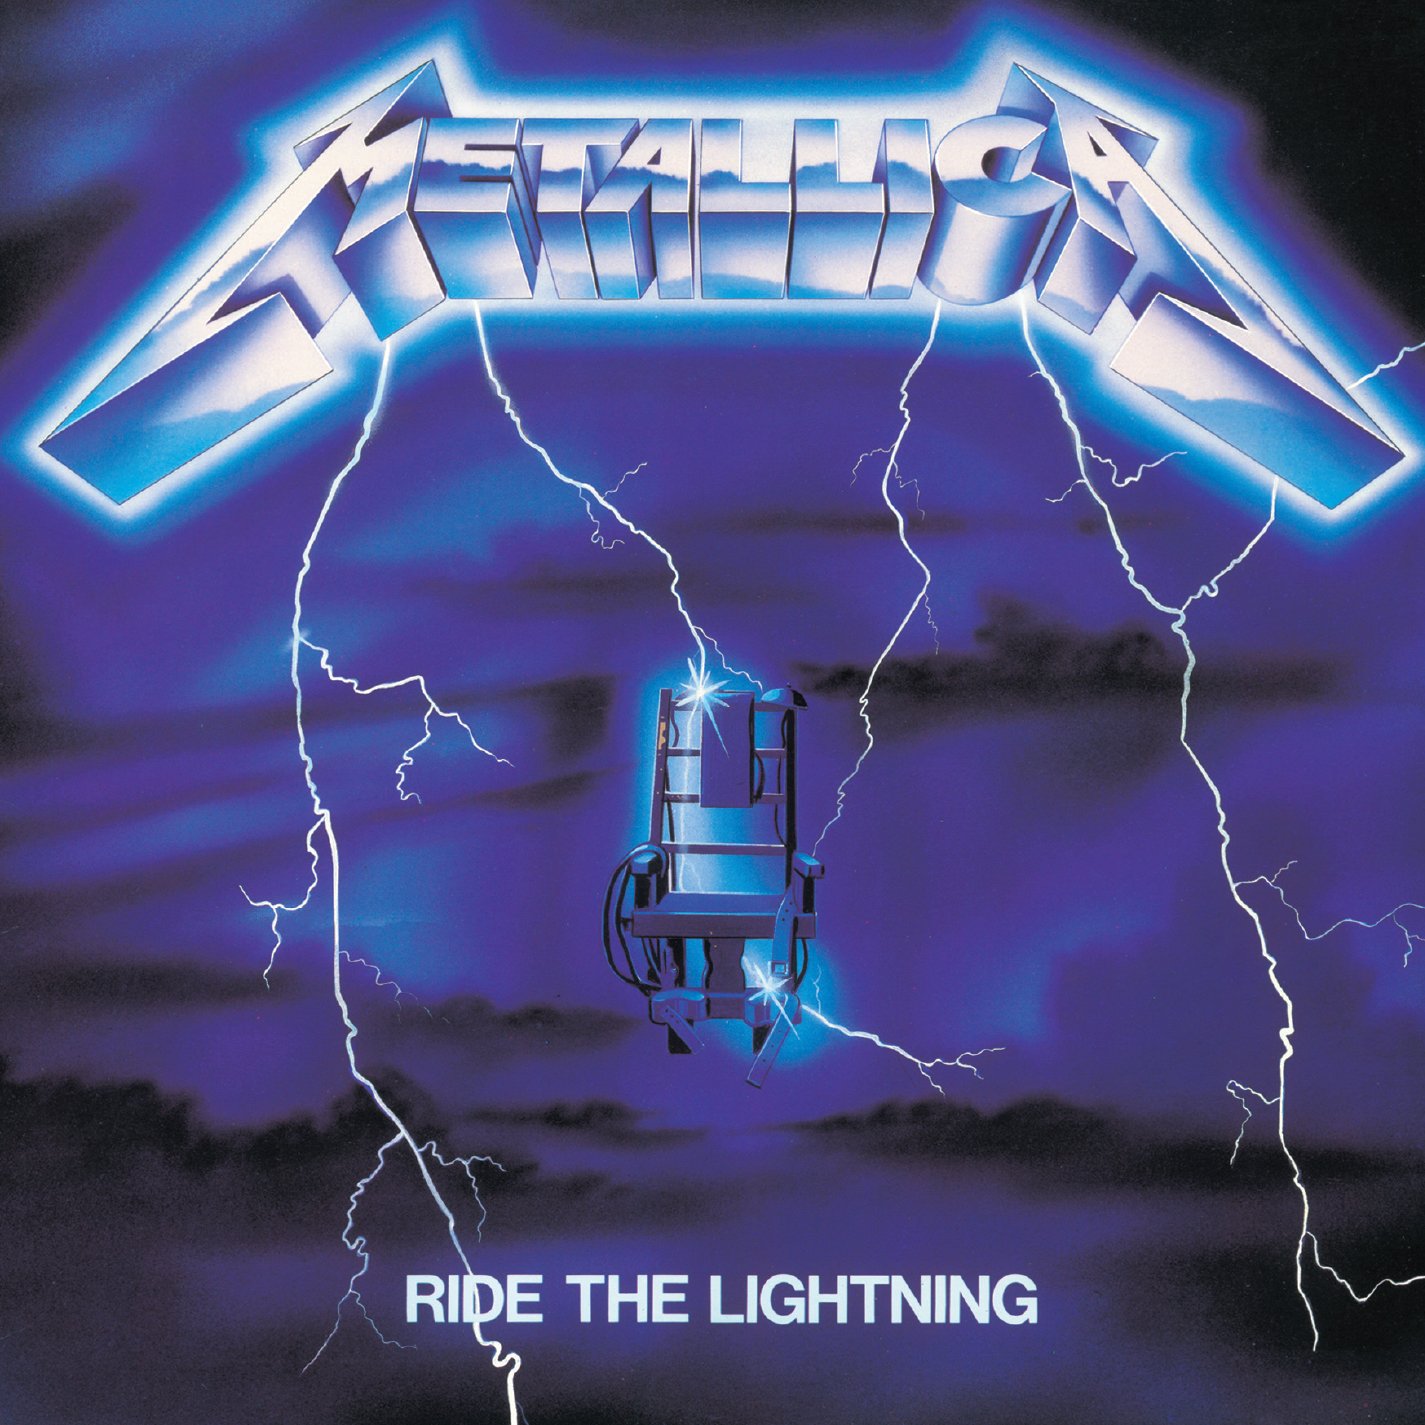 Metallica-Ride The Lightning-(MFN 27 DM)-REISSUE LIMITED EDITION-2LP-FLAC-1987-WRE Download